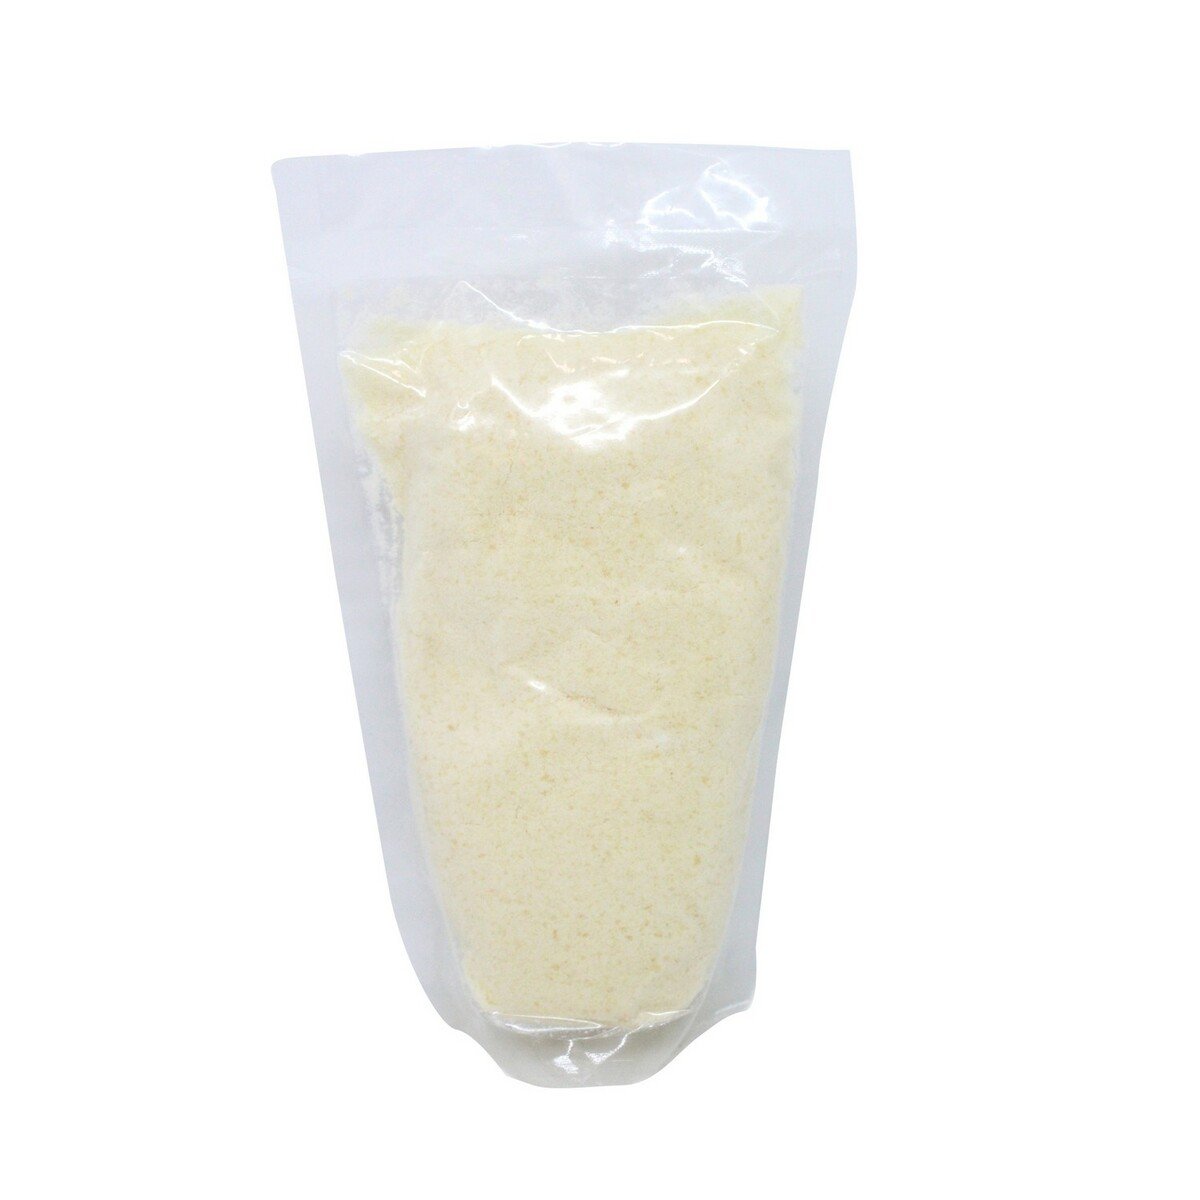 Green Valley Grated Parmesan Cheese 200g